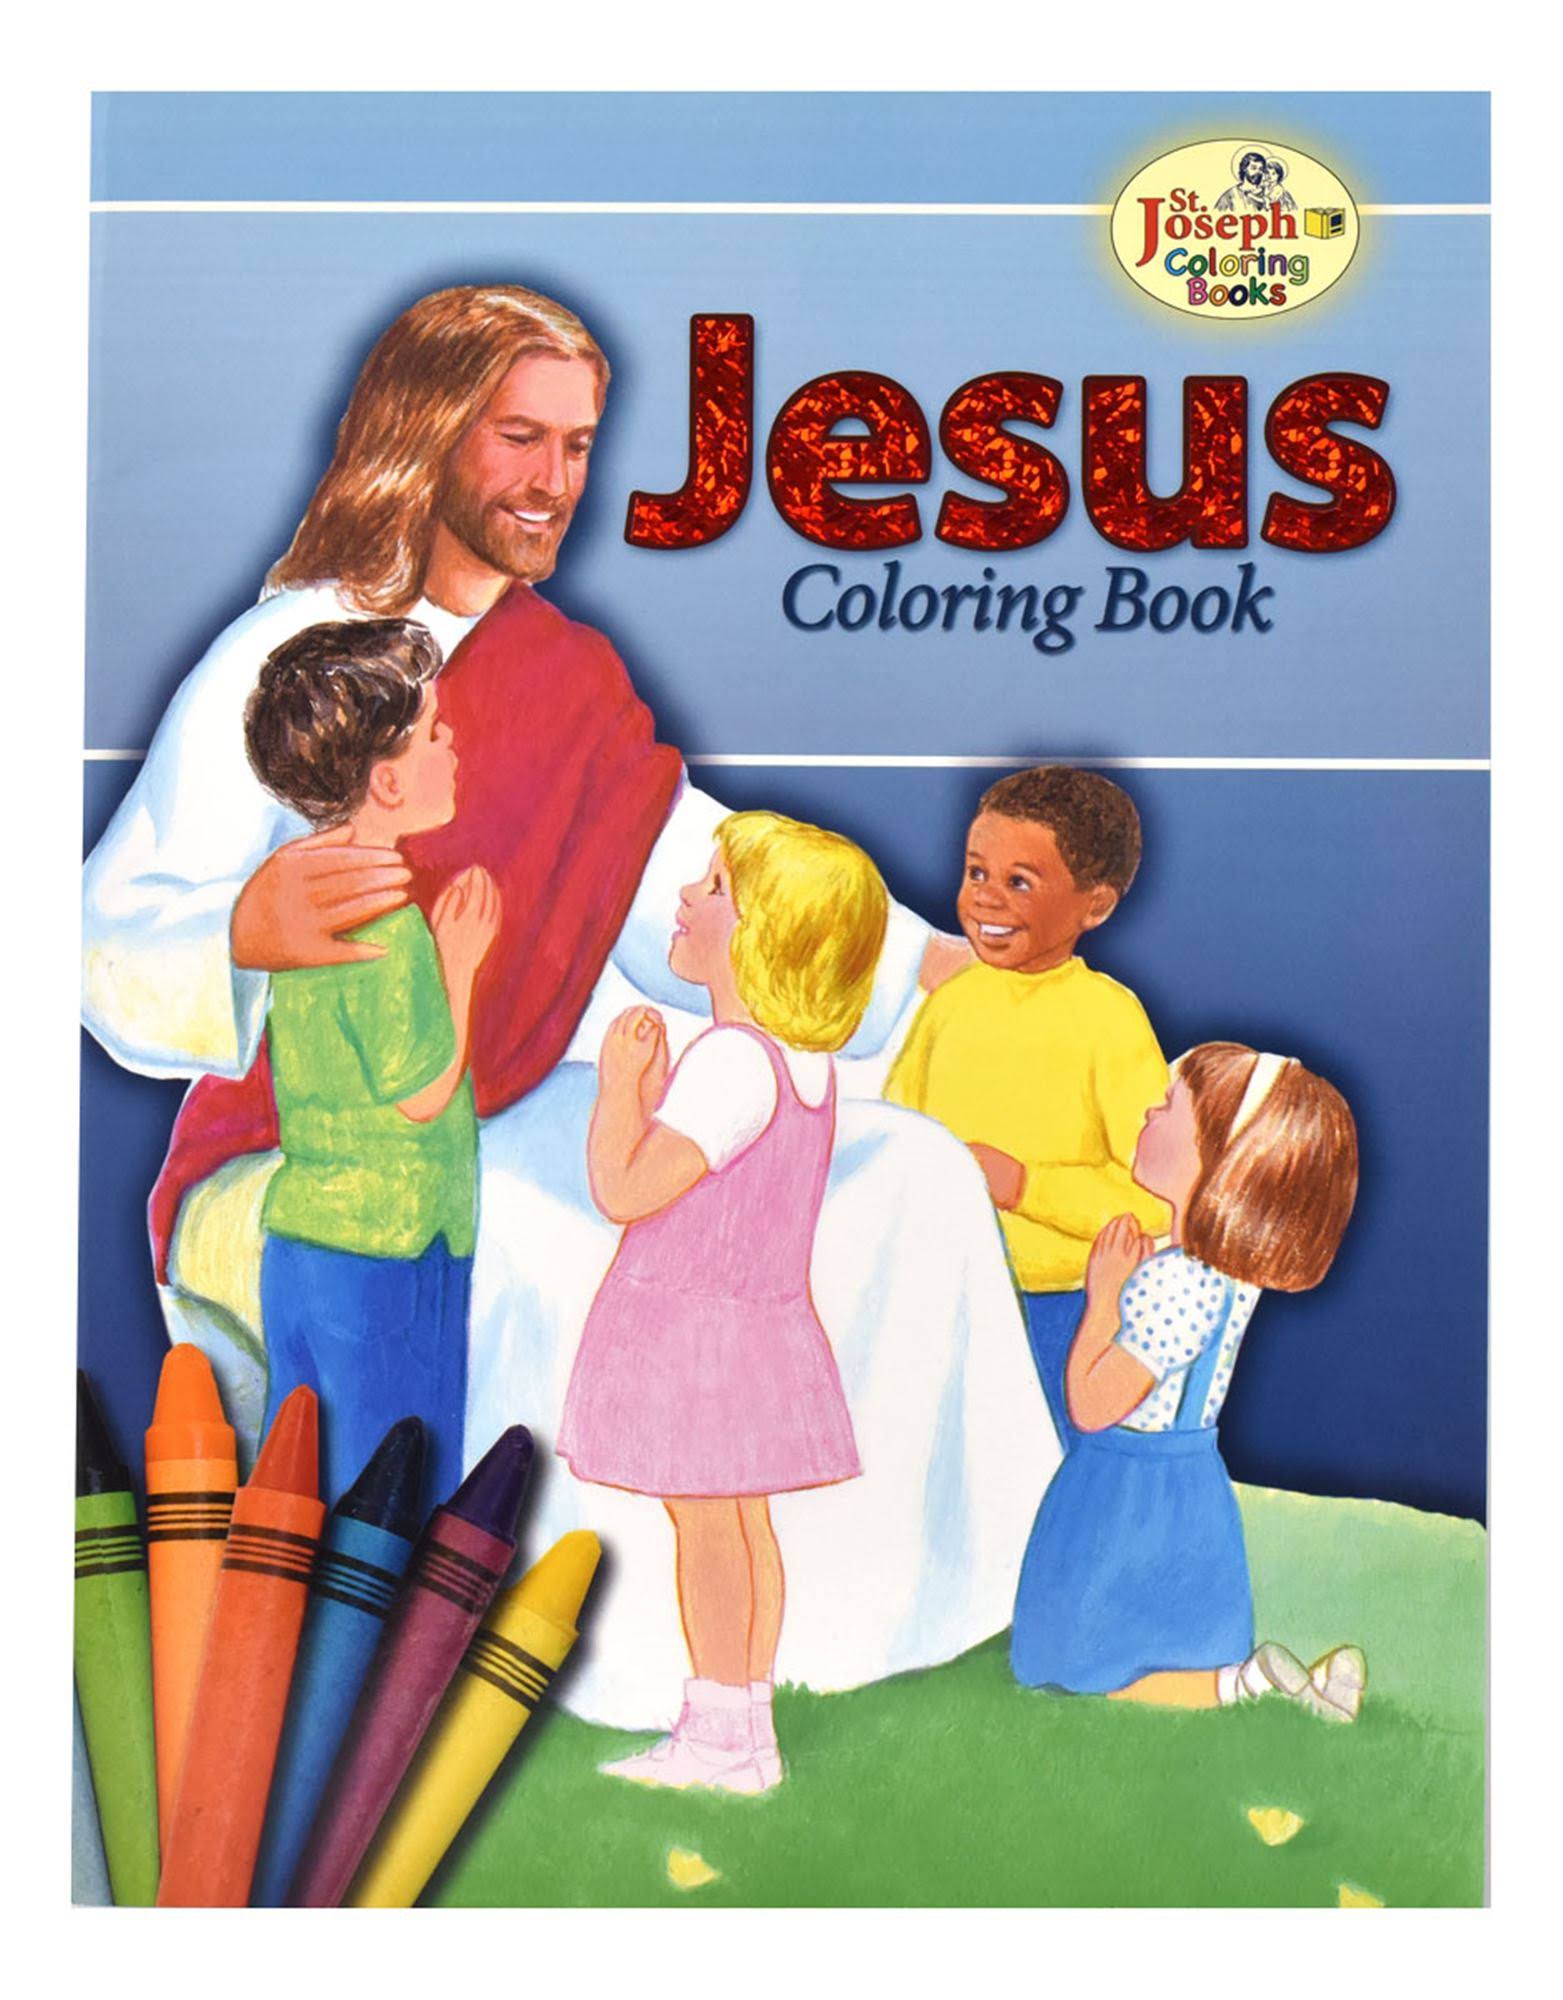 Coloring Book About Jesus [Book]